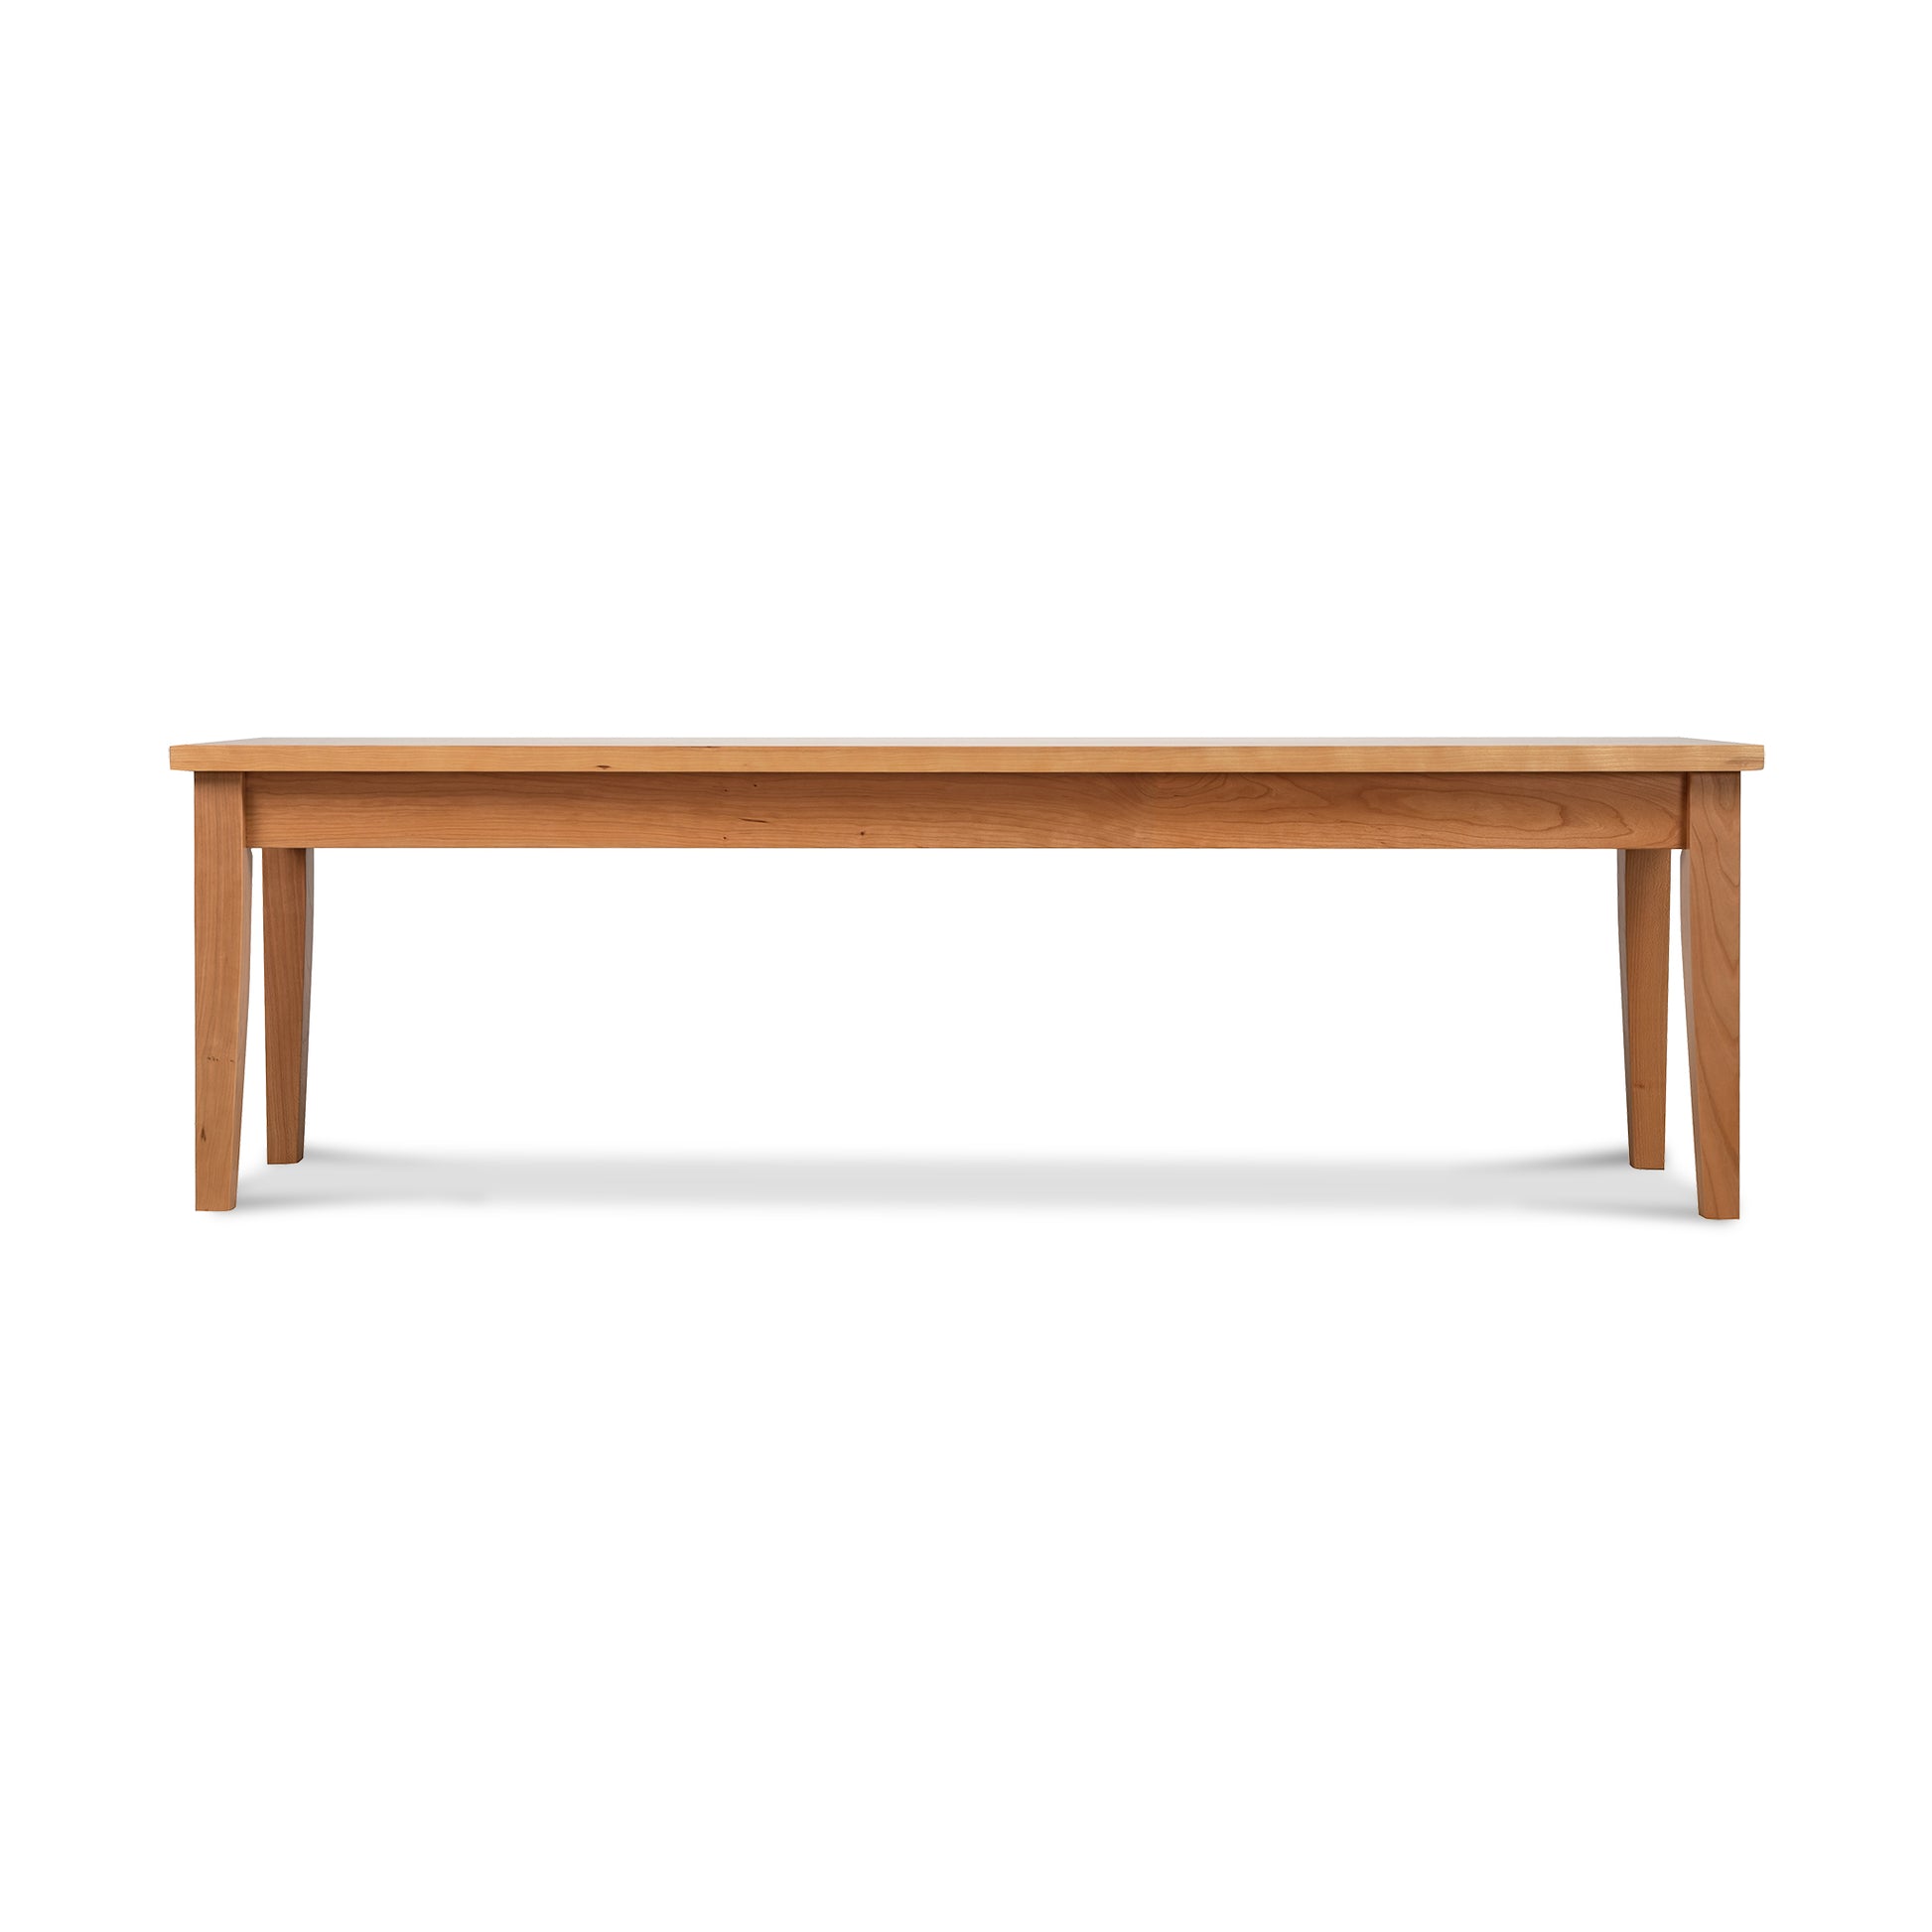 A Lyndon Furniture Classic Shaker Bench on a white background.